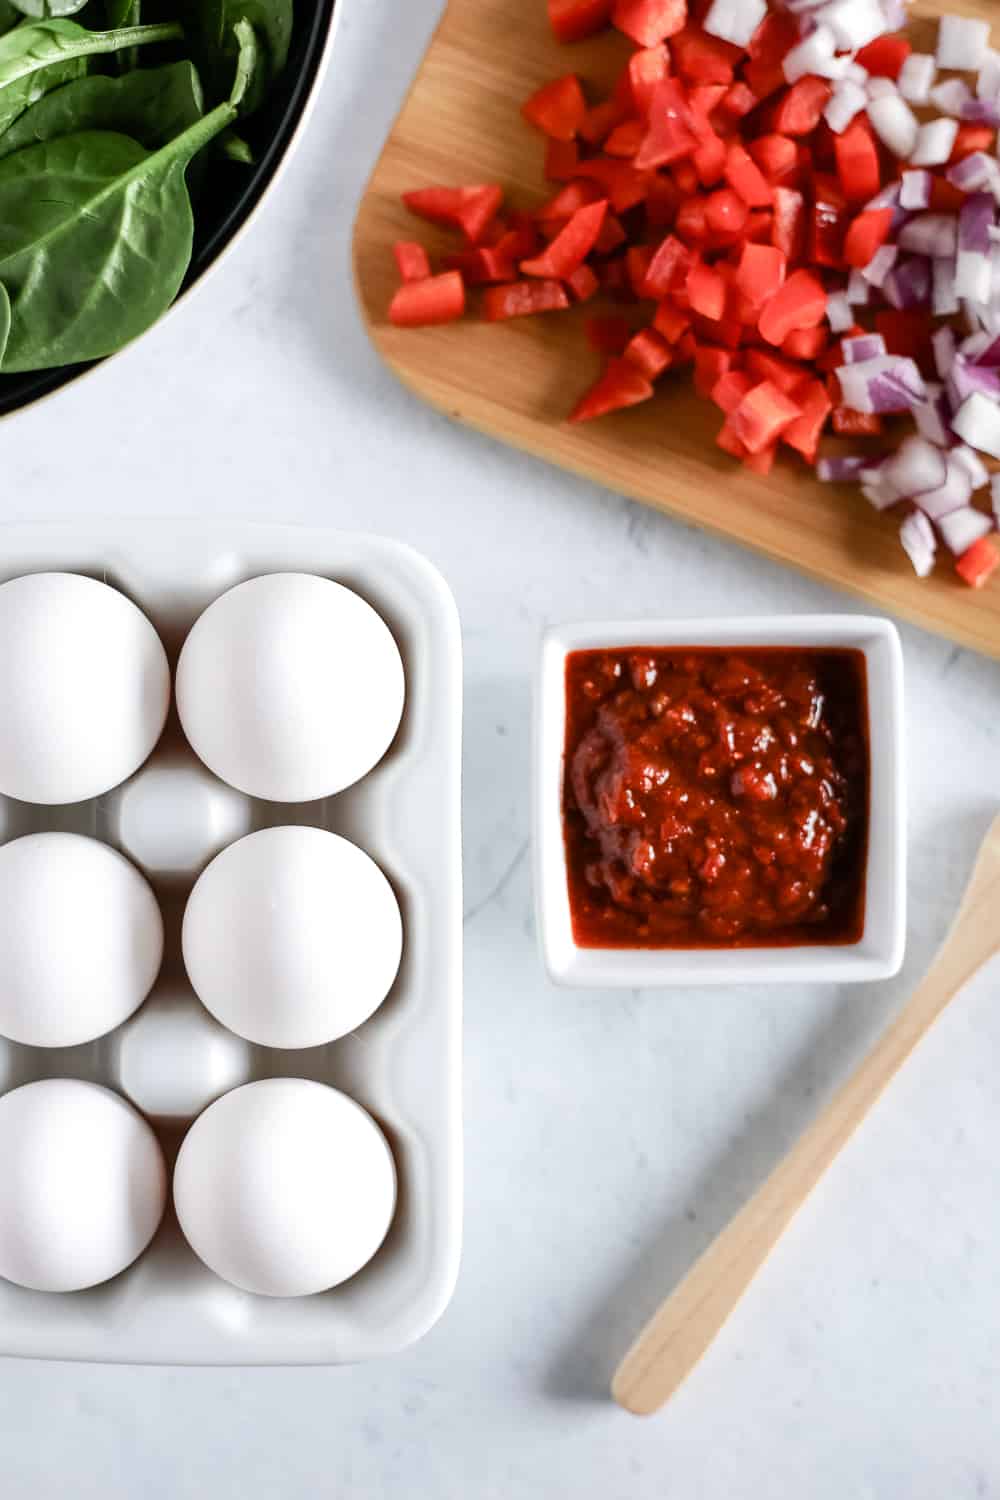 An overhead view of white eggs, fresh veggies, a cutting board, and a sauce ready to be cooked into a breakfast recipe